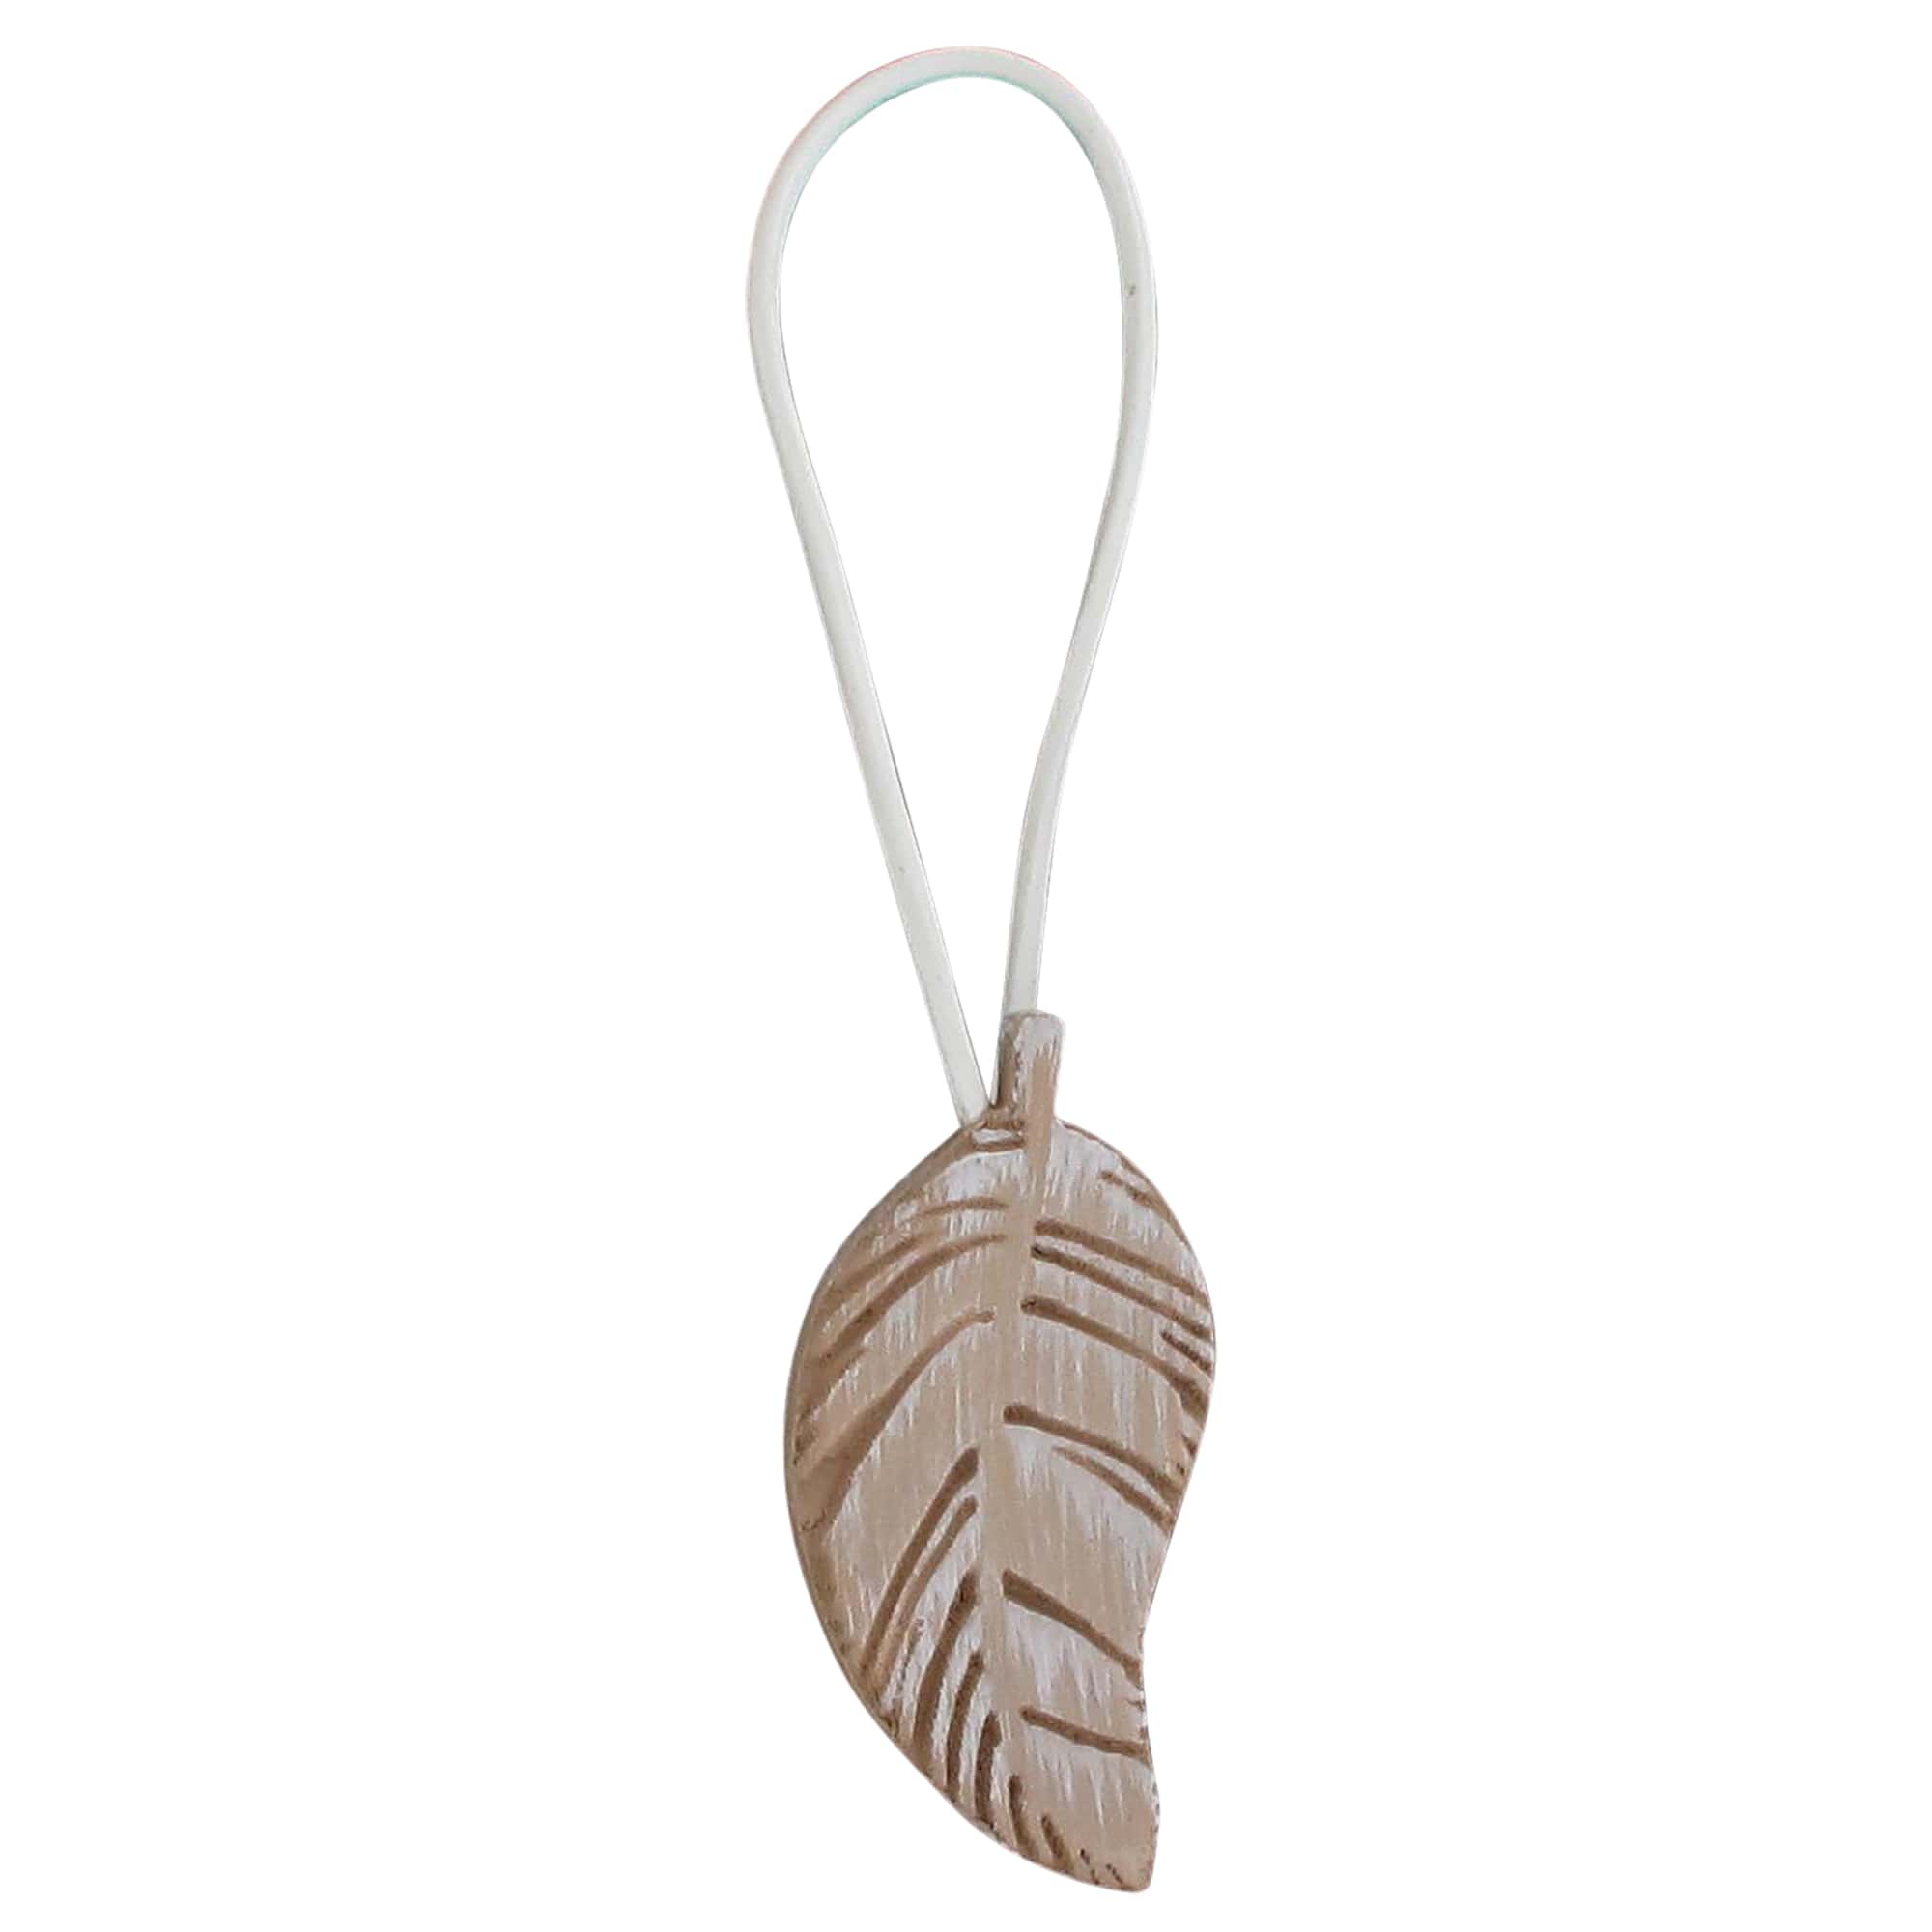 Wooden Leaf Tieback With Magnet Sonora Small Size